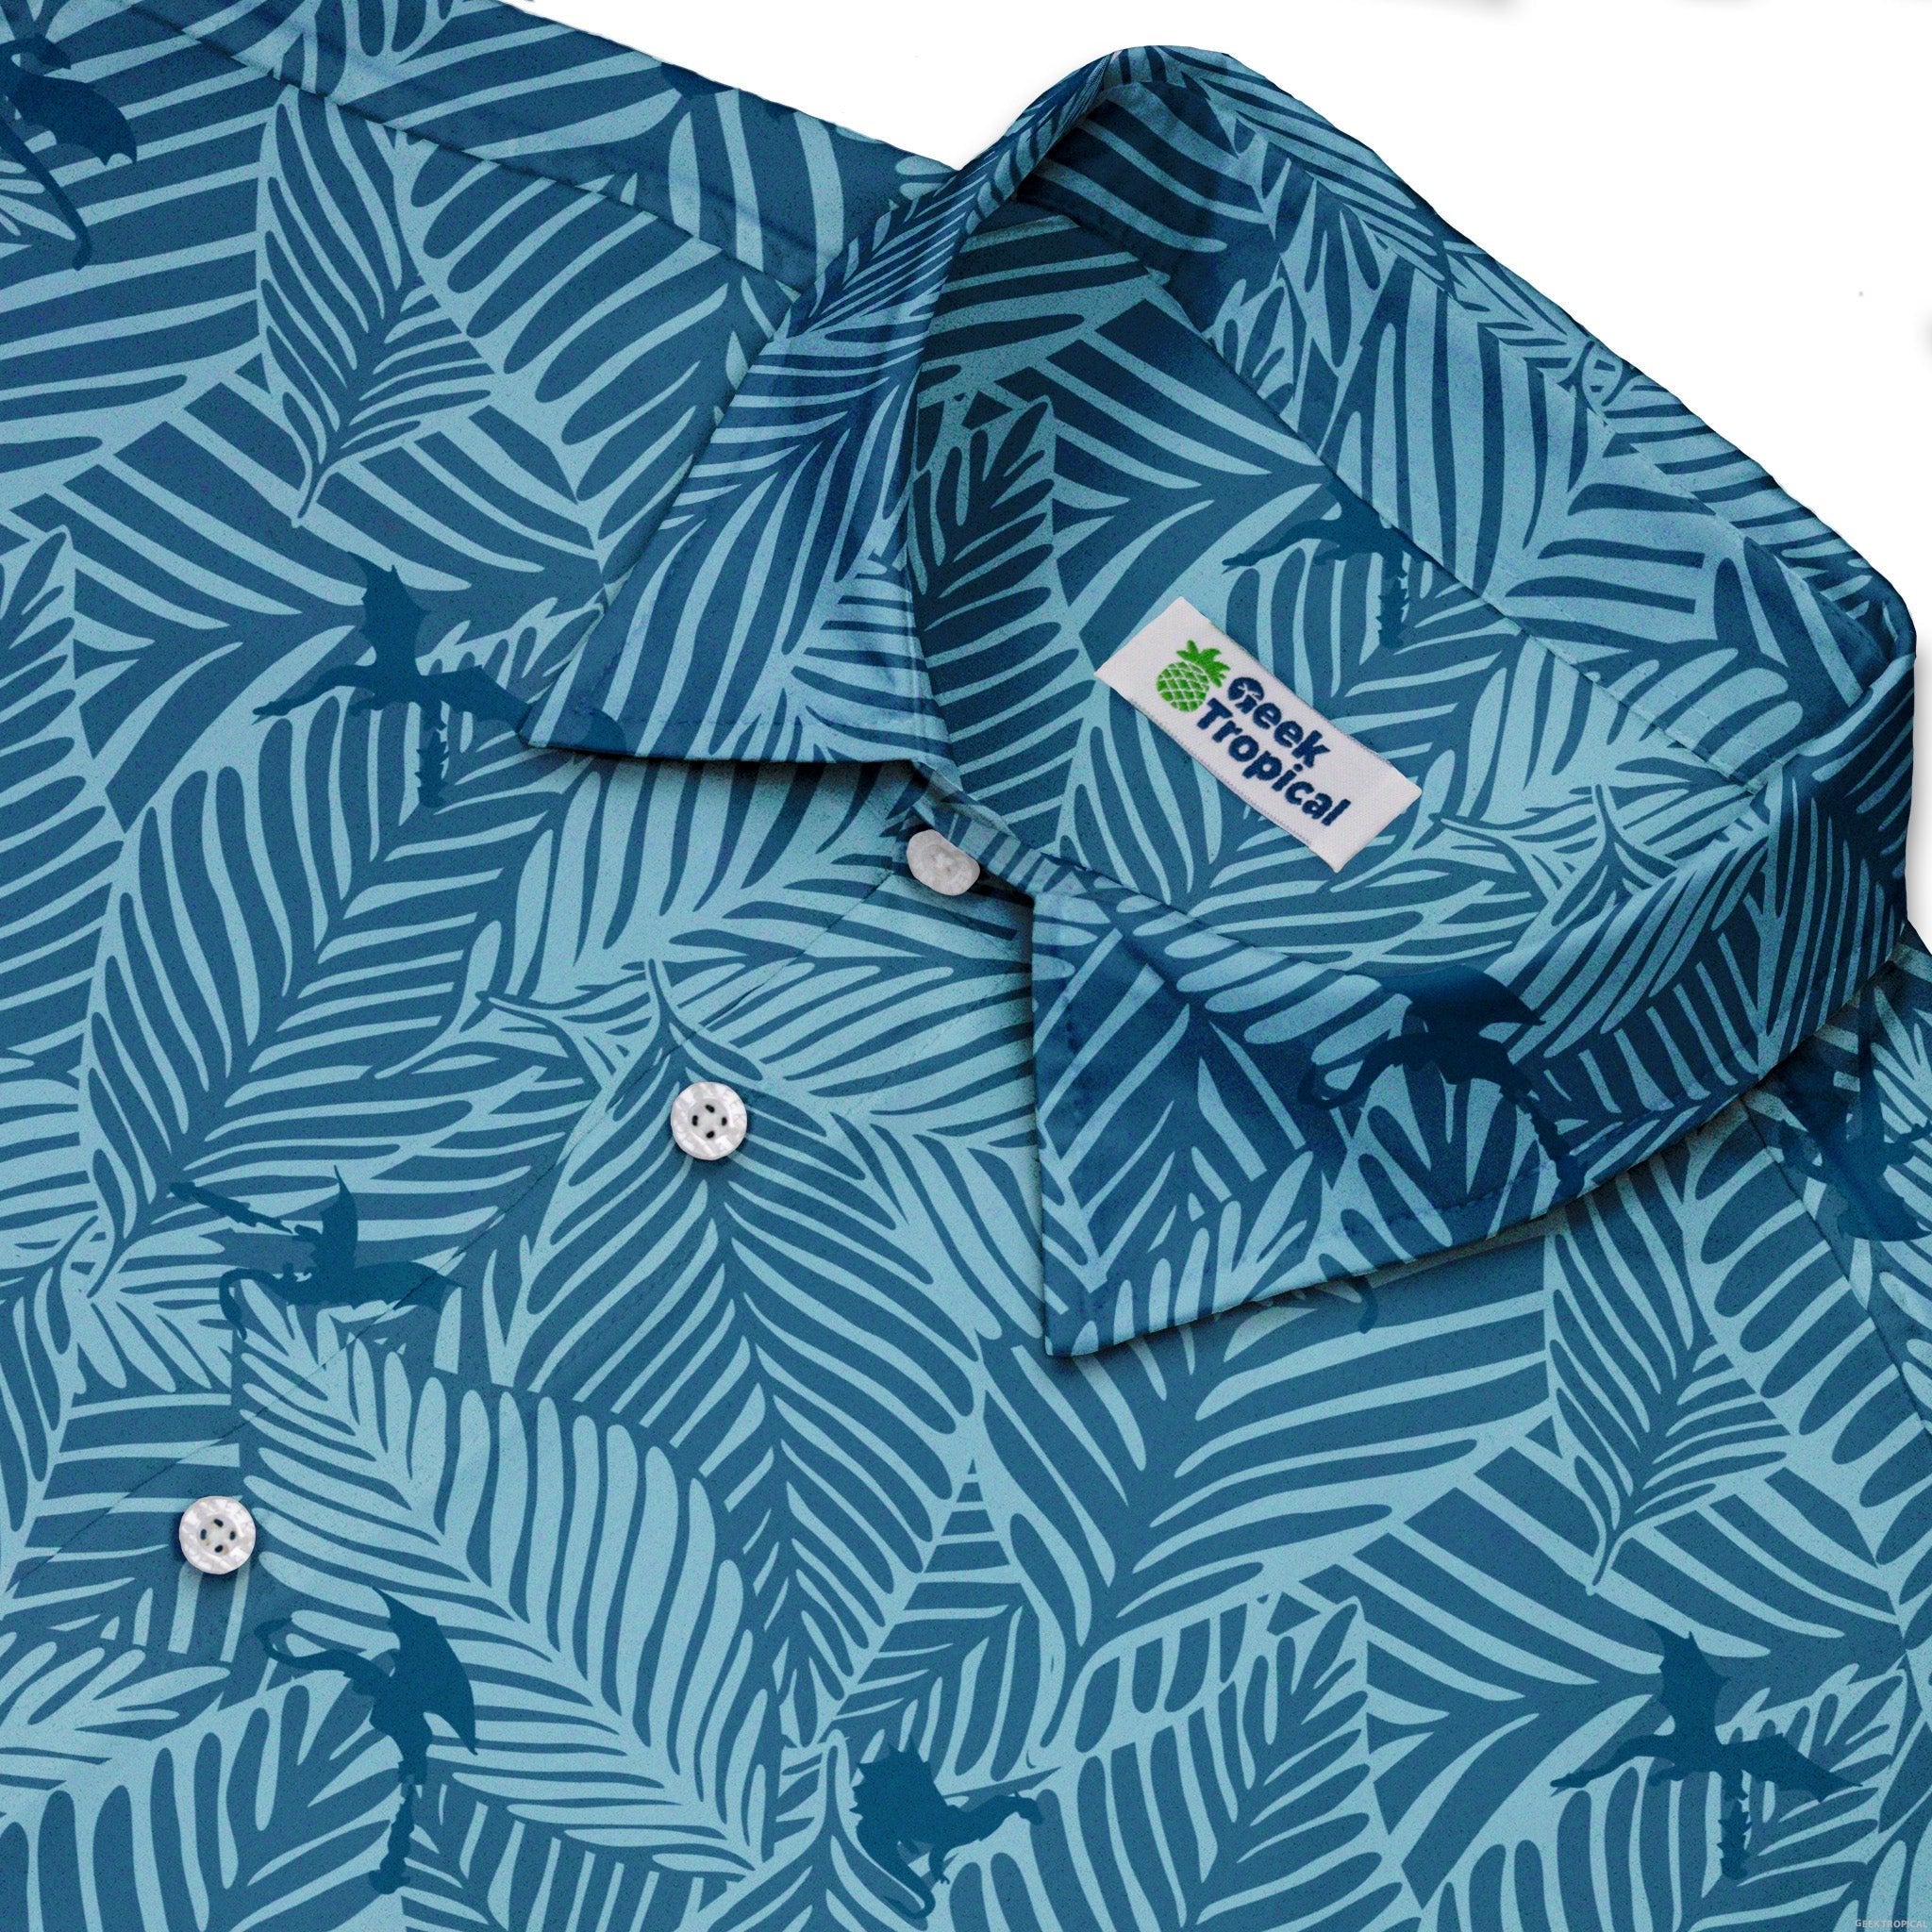 Tropical Dragons Button Up Shirt - adult sizing - Design by Dunking Toast - dnd & rpg print